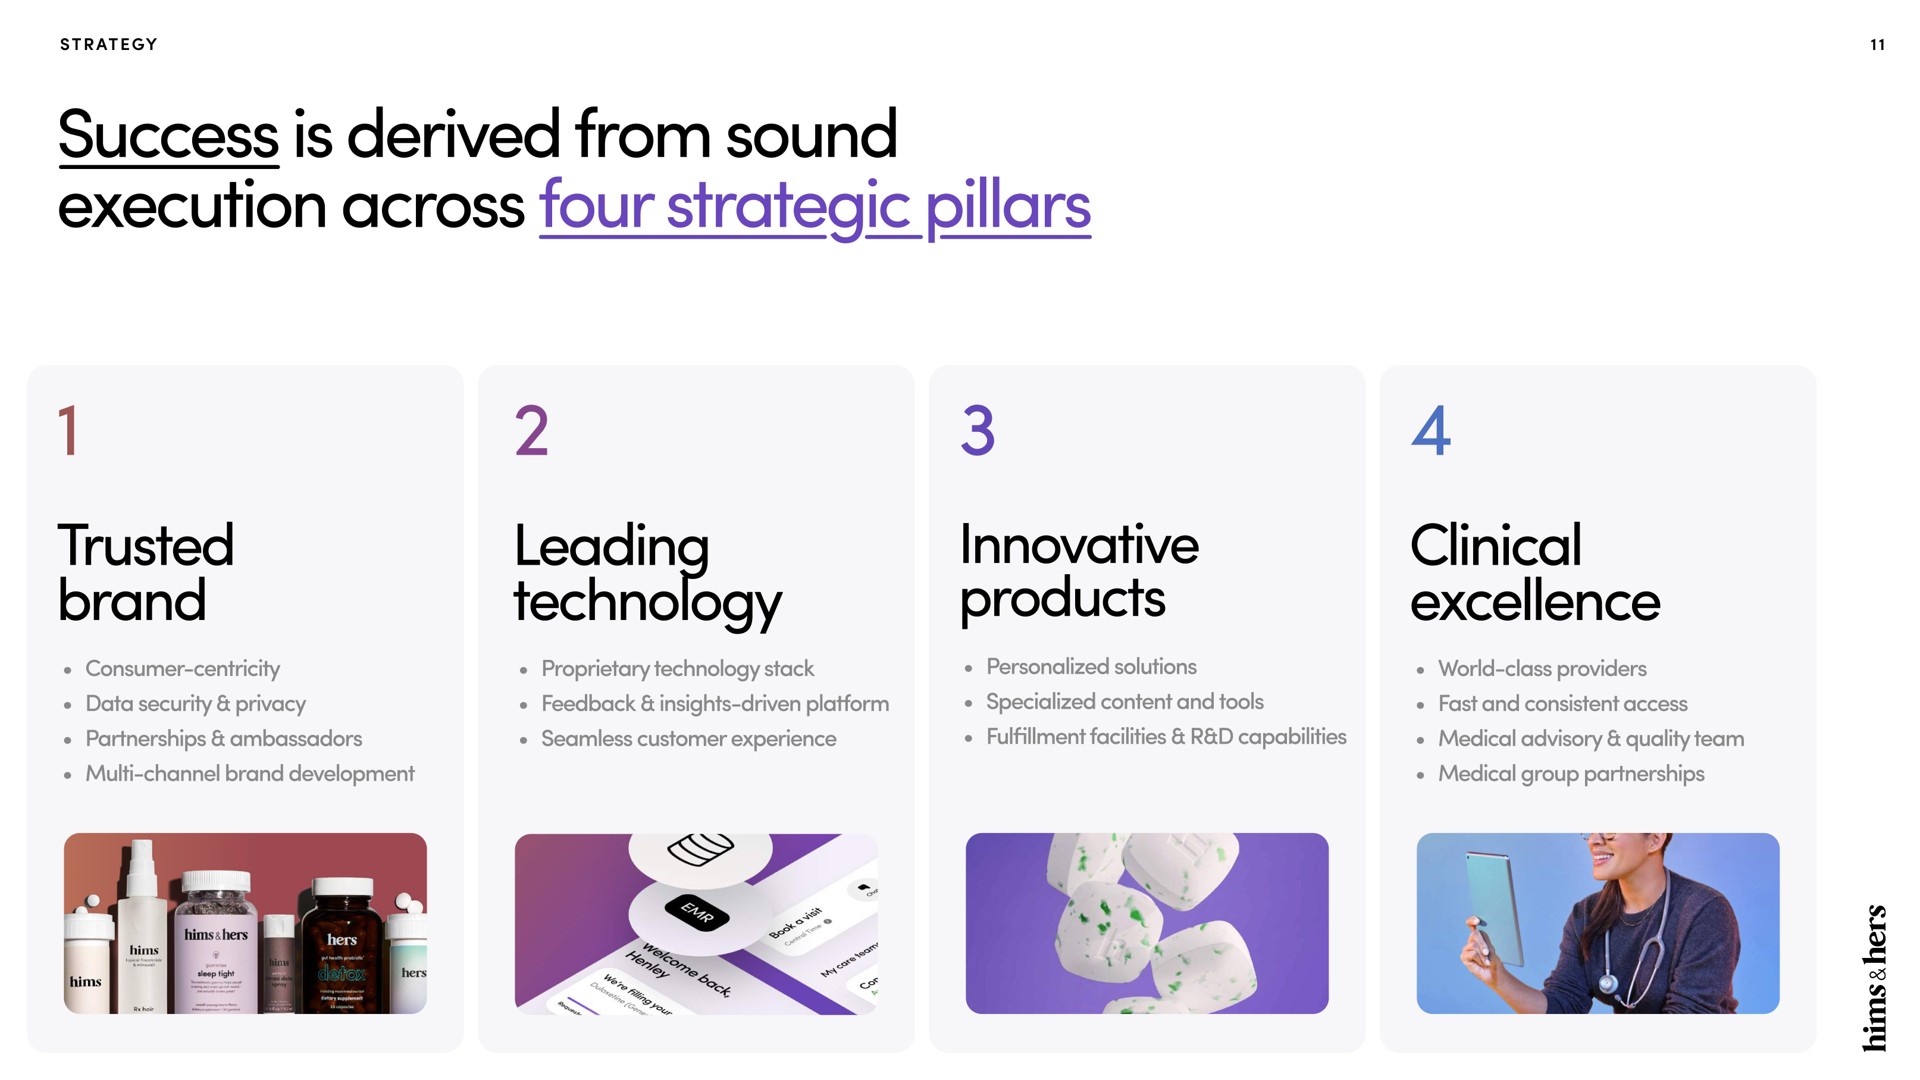 success is derived from sound execution across four strategic pillars trusted brand leadin technology innovative products clinical excellence | Hims & Hers